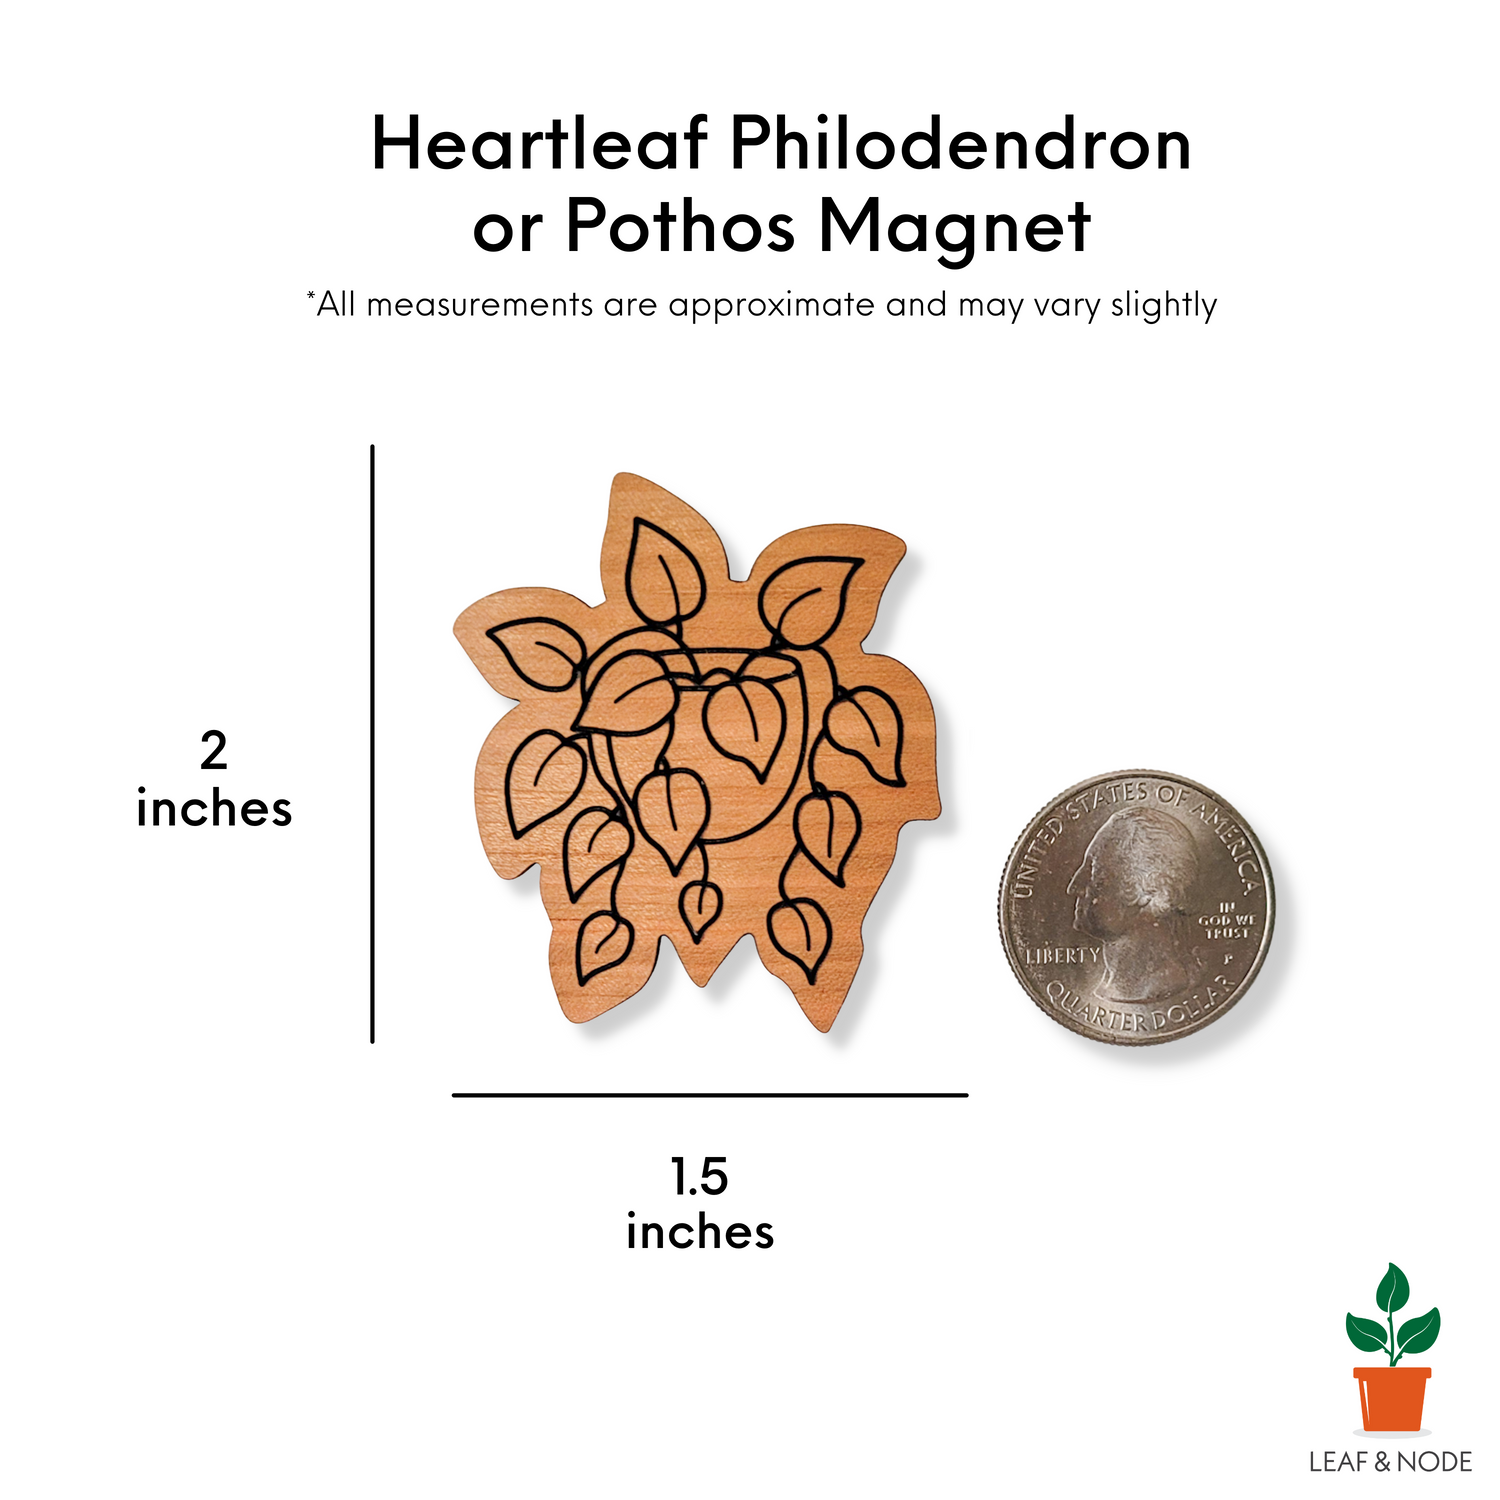 Engraved pothos or heartleaf philodendron magnet on white background with size information that matches the written product description.